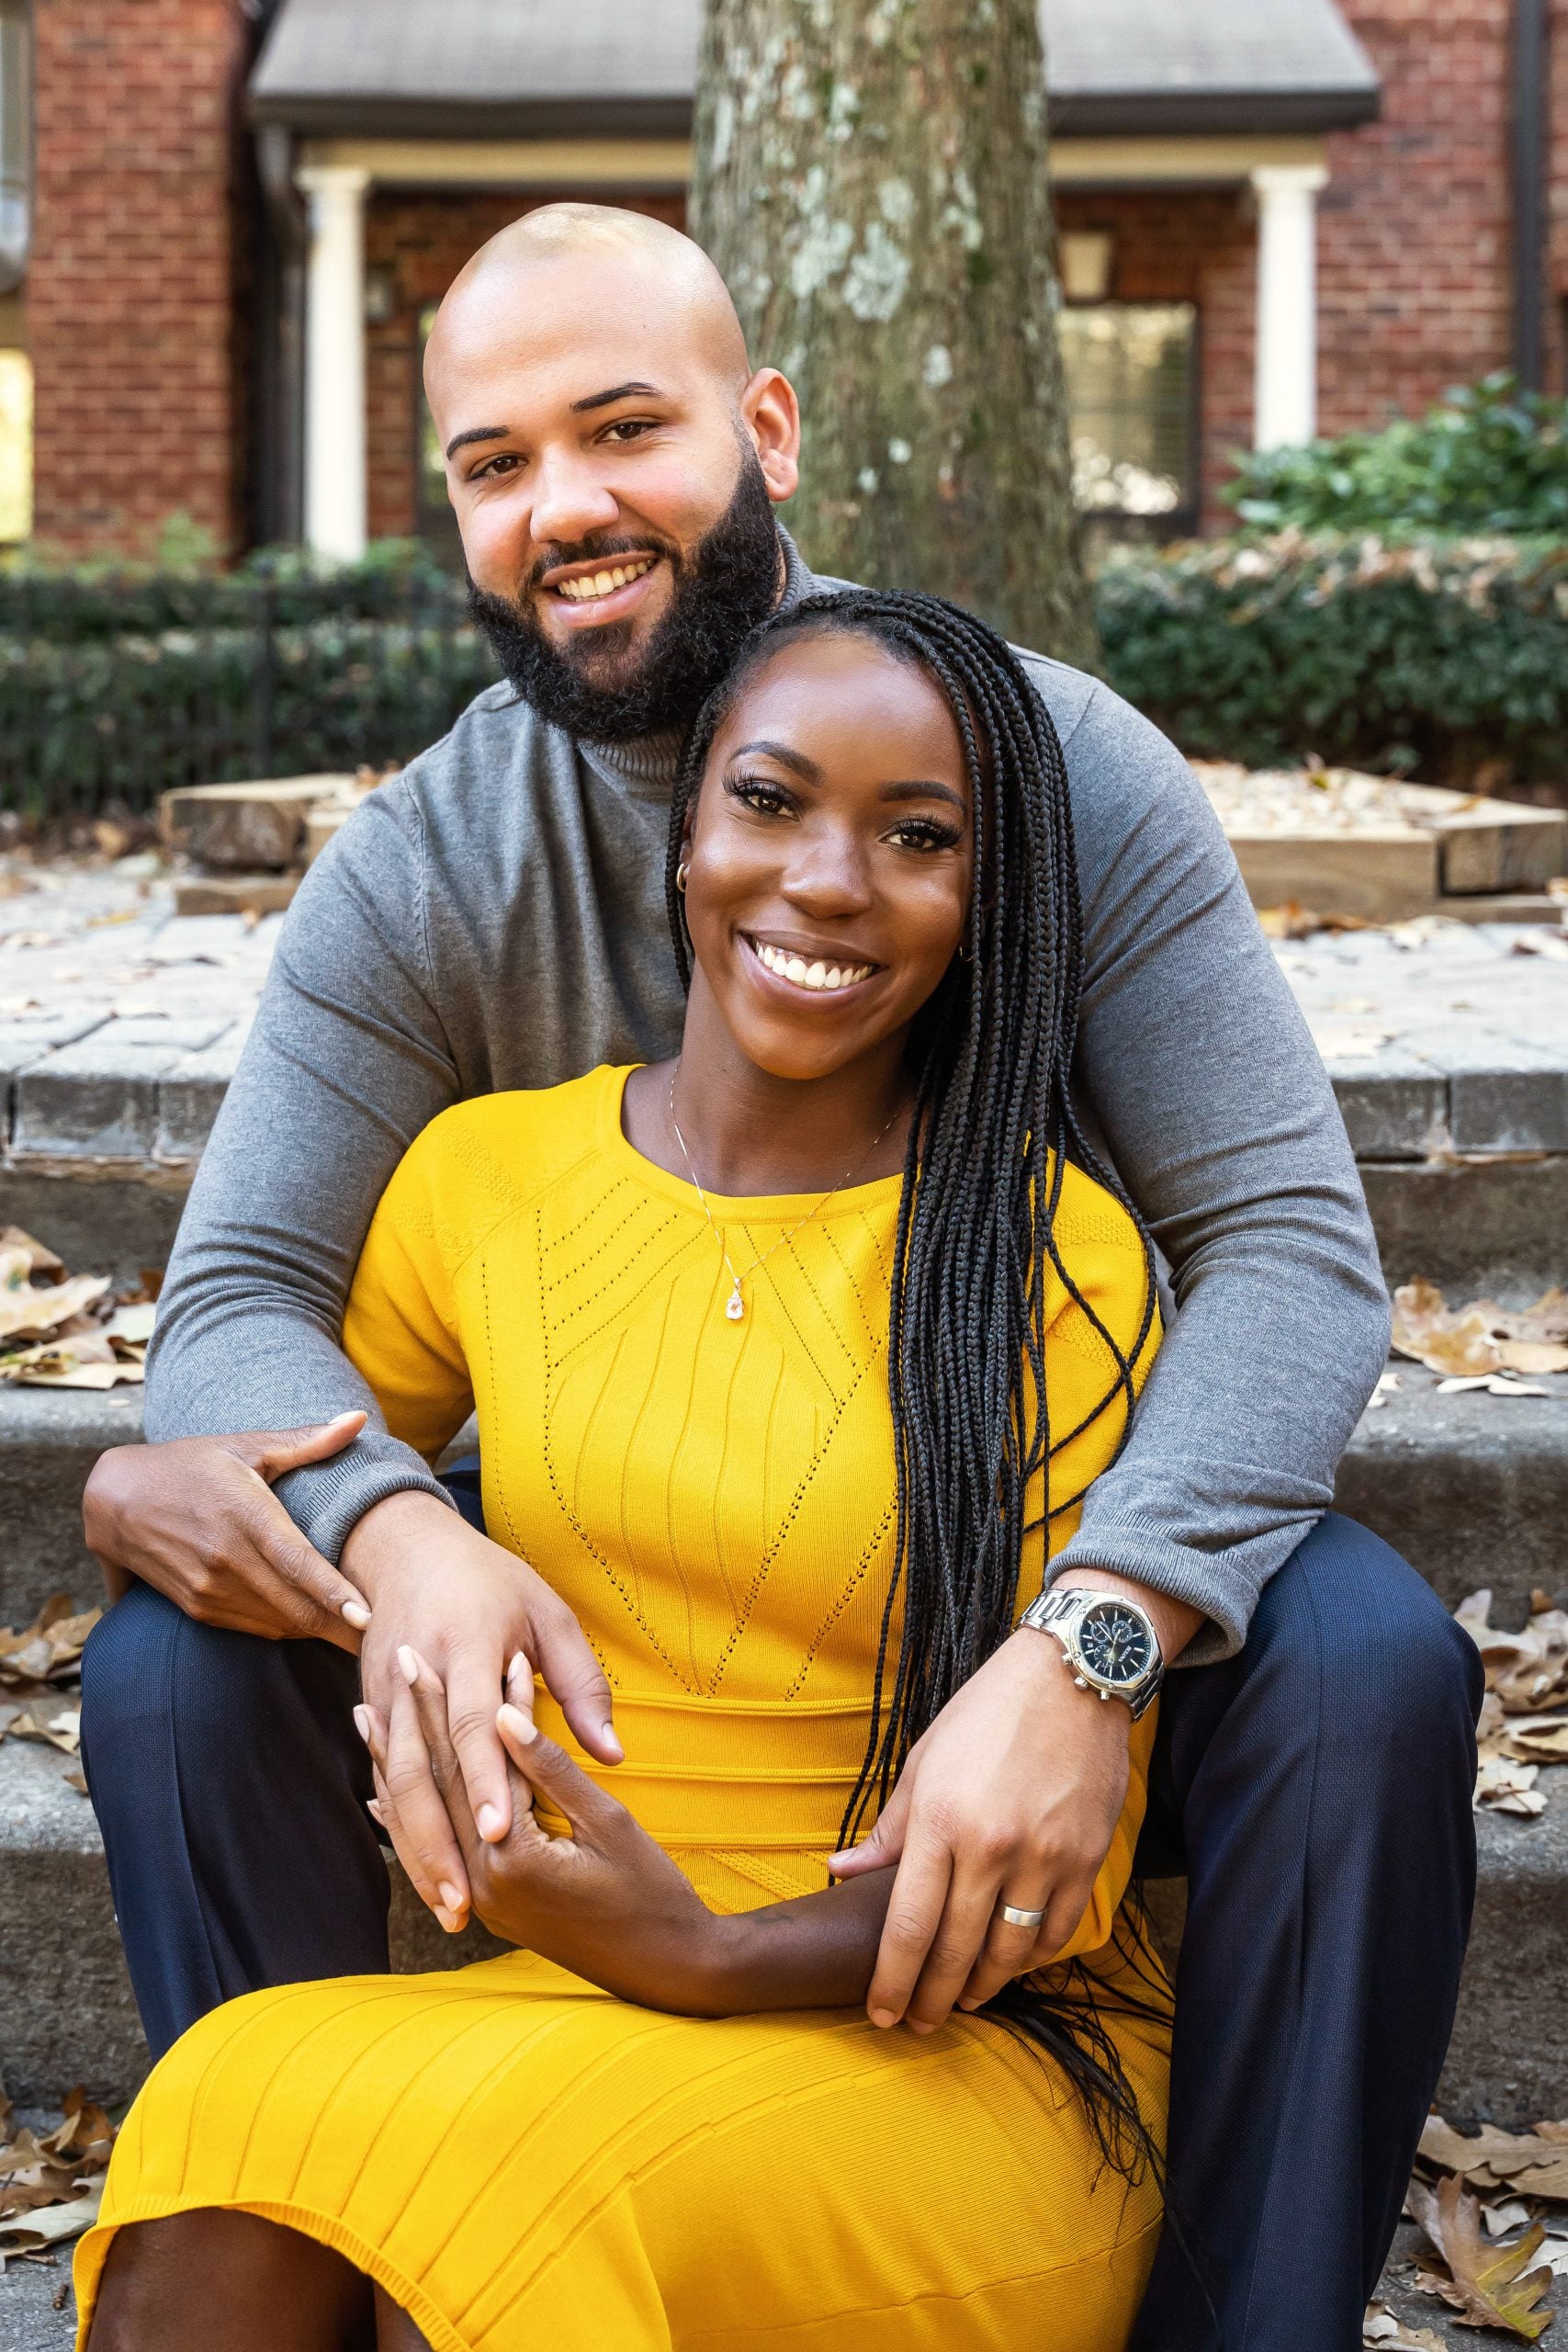 Vincent And Briana Of 'Married At First Sight' Explain The Perks Of  Marrying A Stranger And Finding Love On TV